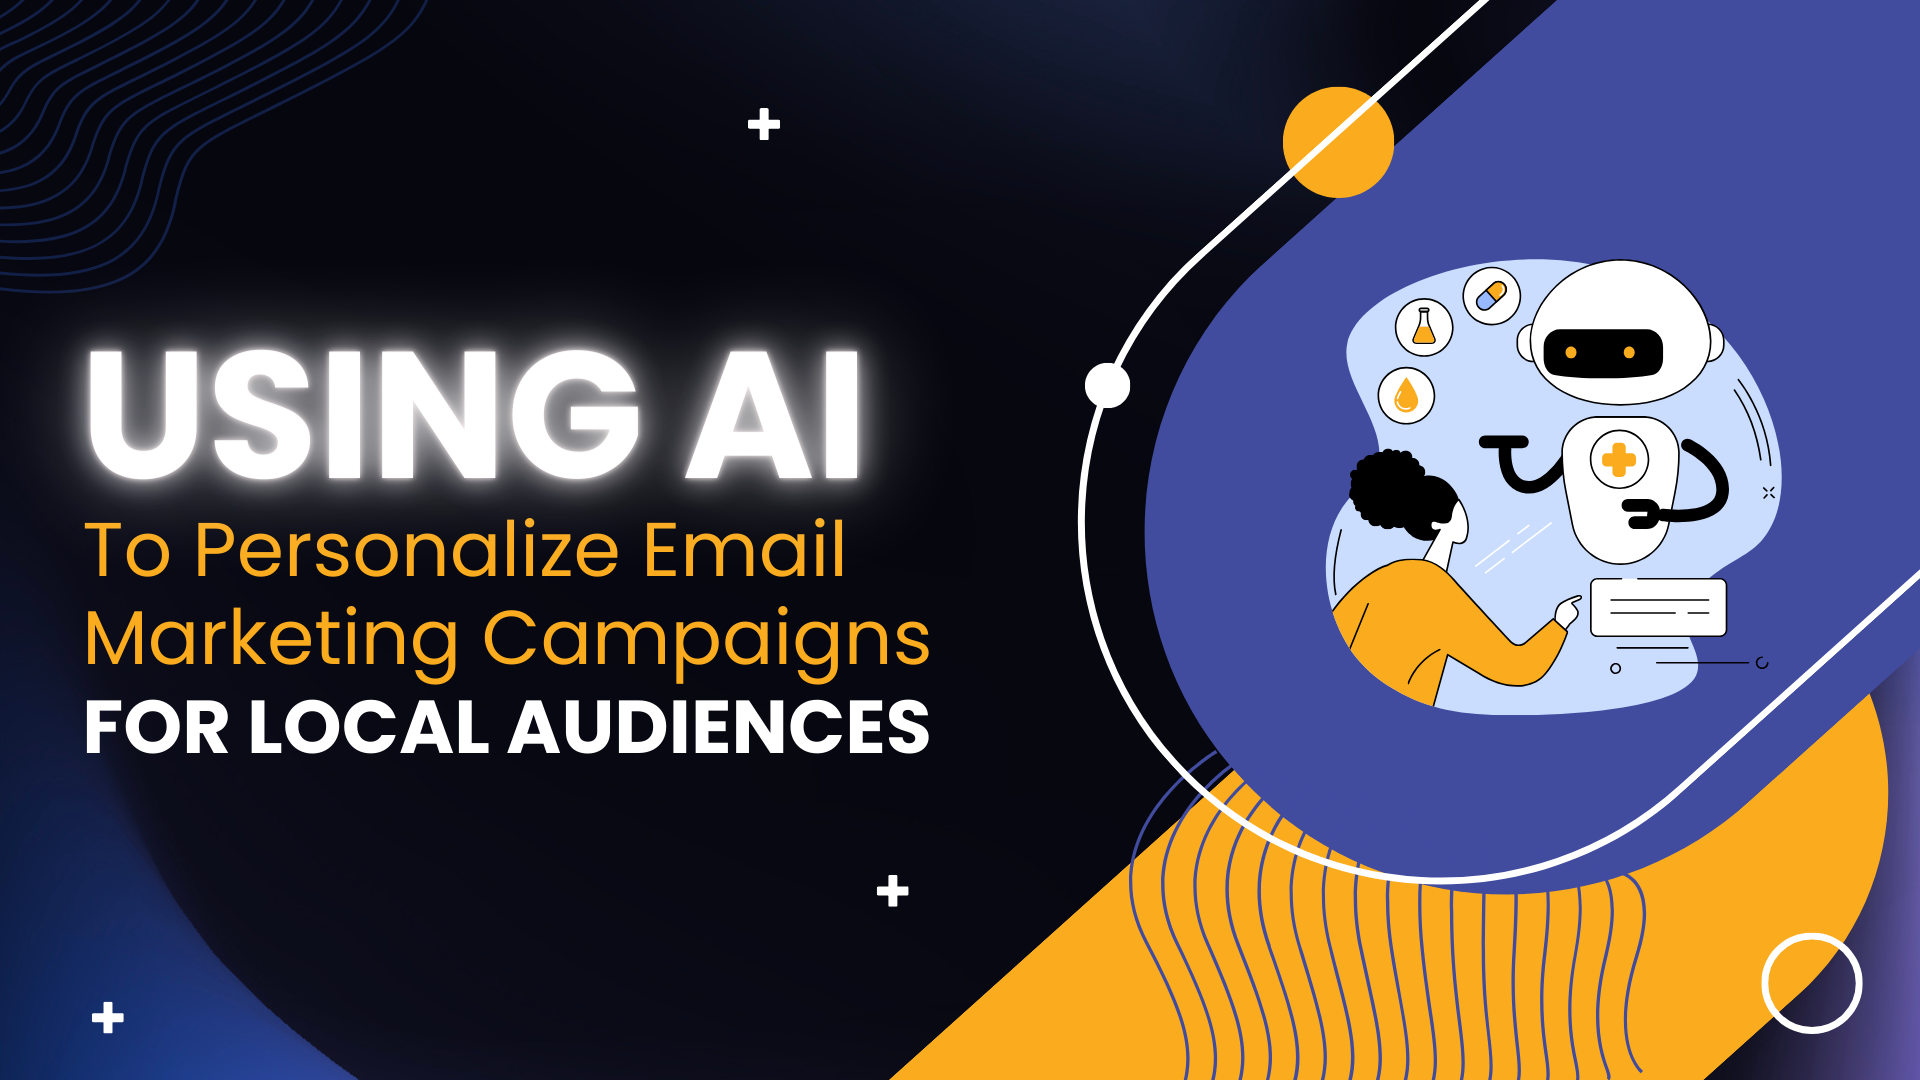 Using AI to Personalize Email Marketing Campaigns for Local Audiences